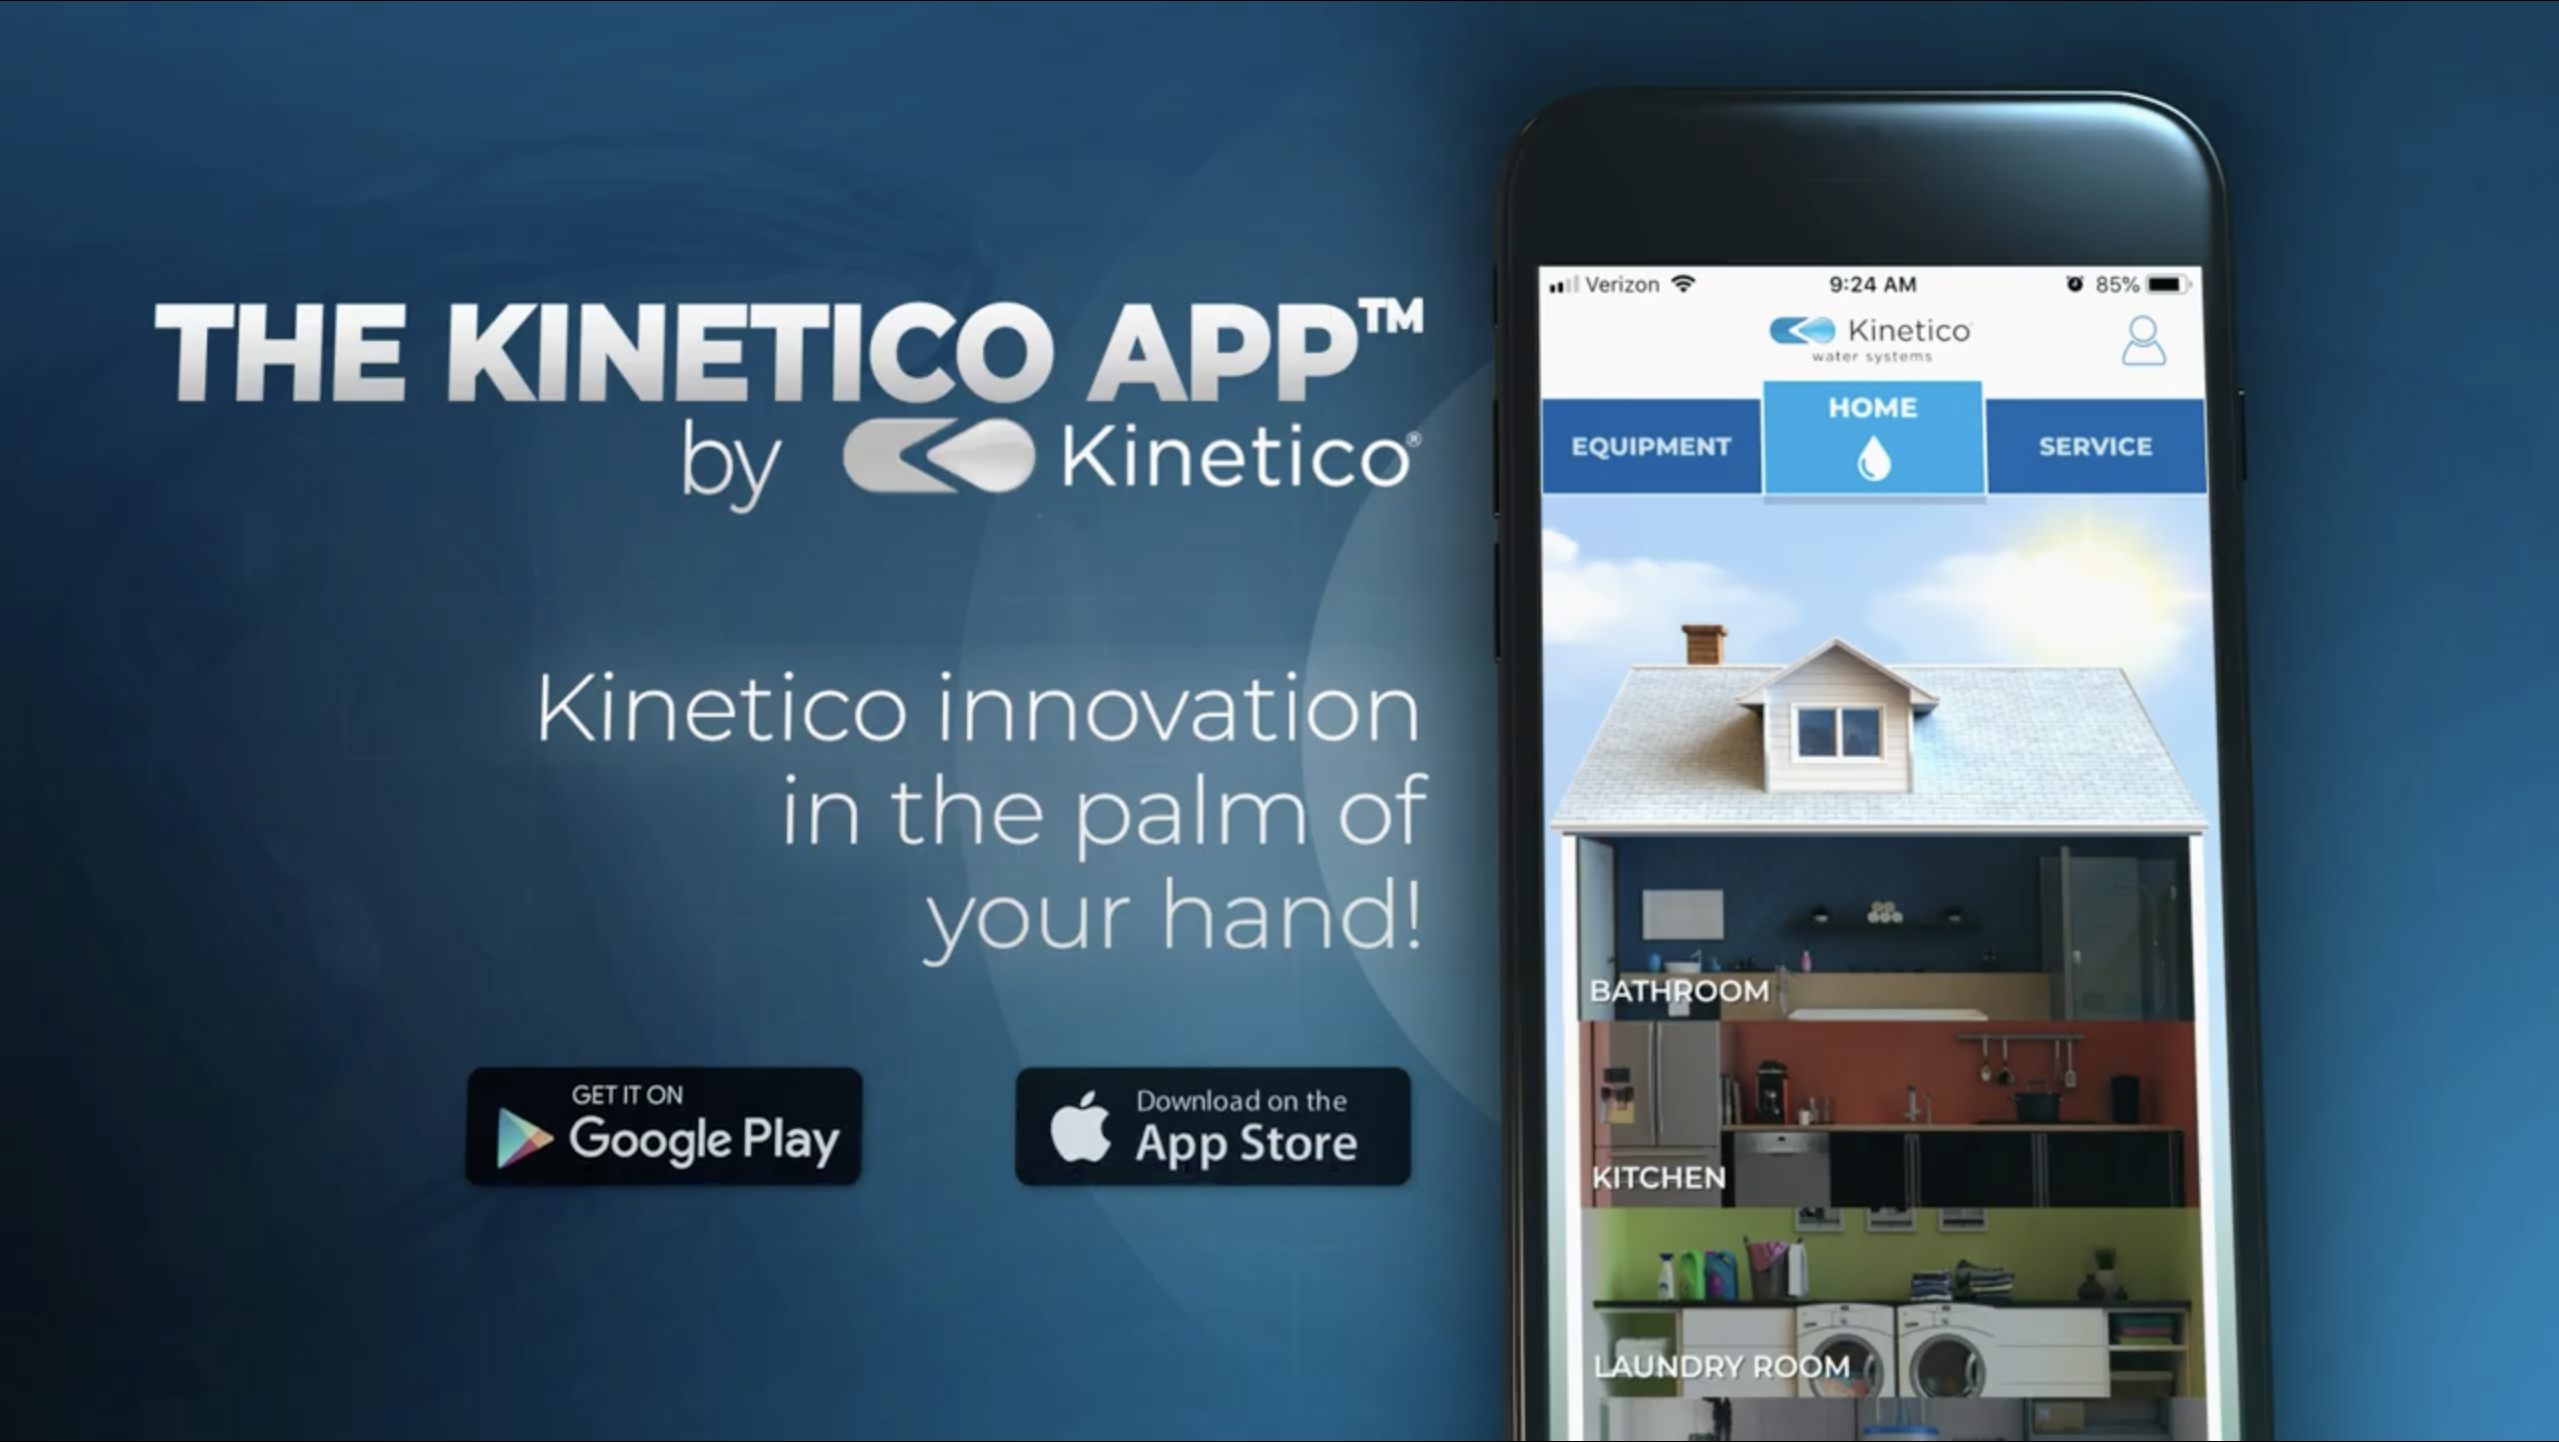 The Kinetico App by Kinetico. Kinetico innovation in the palm of your hand.